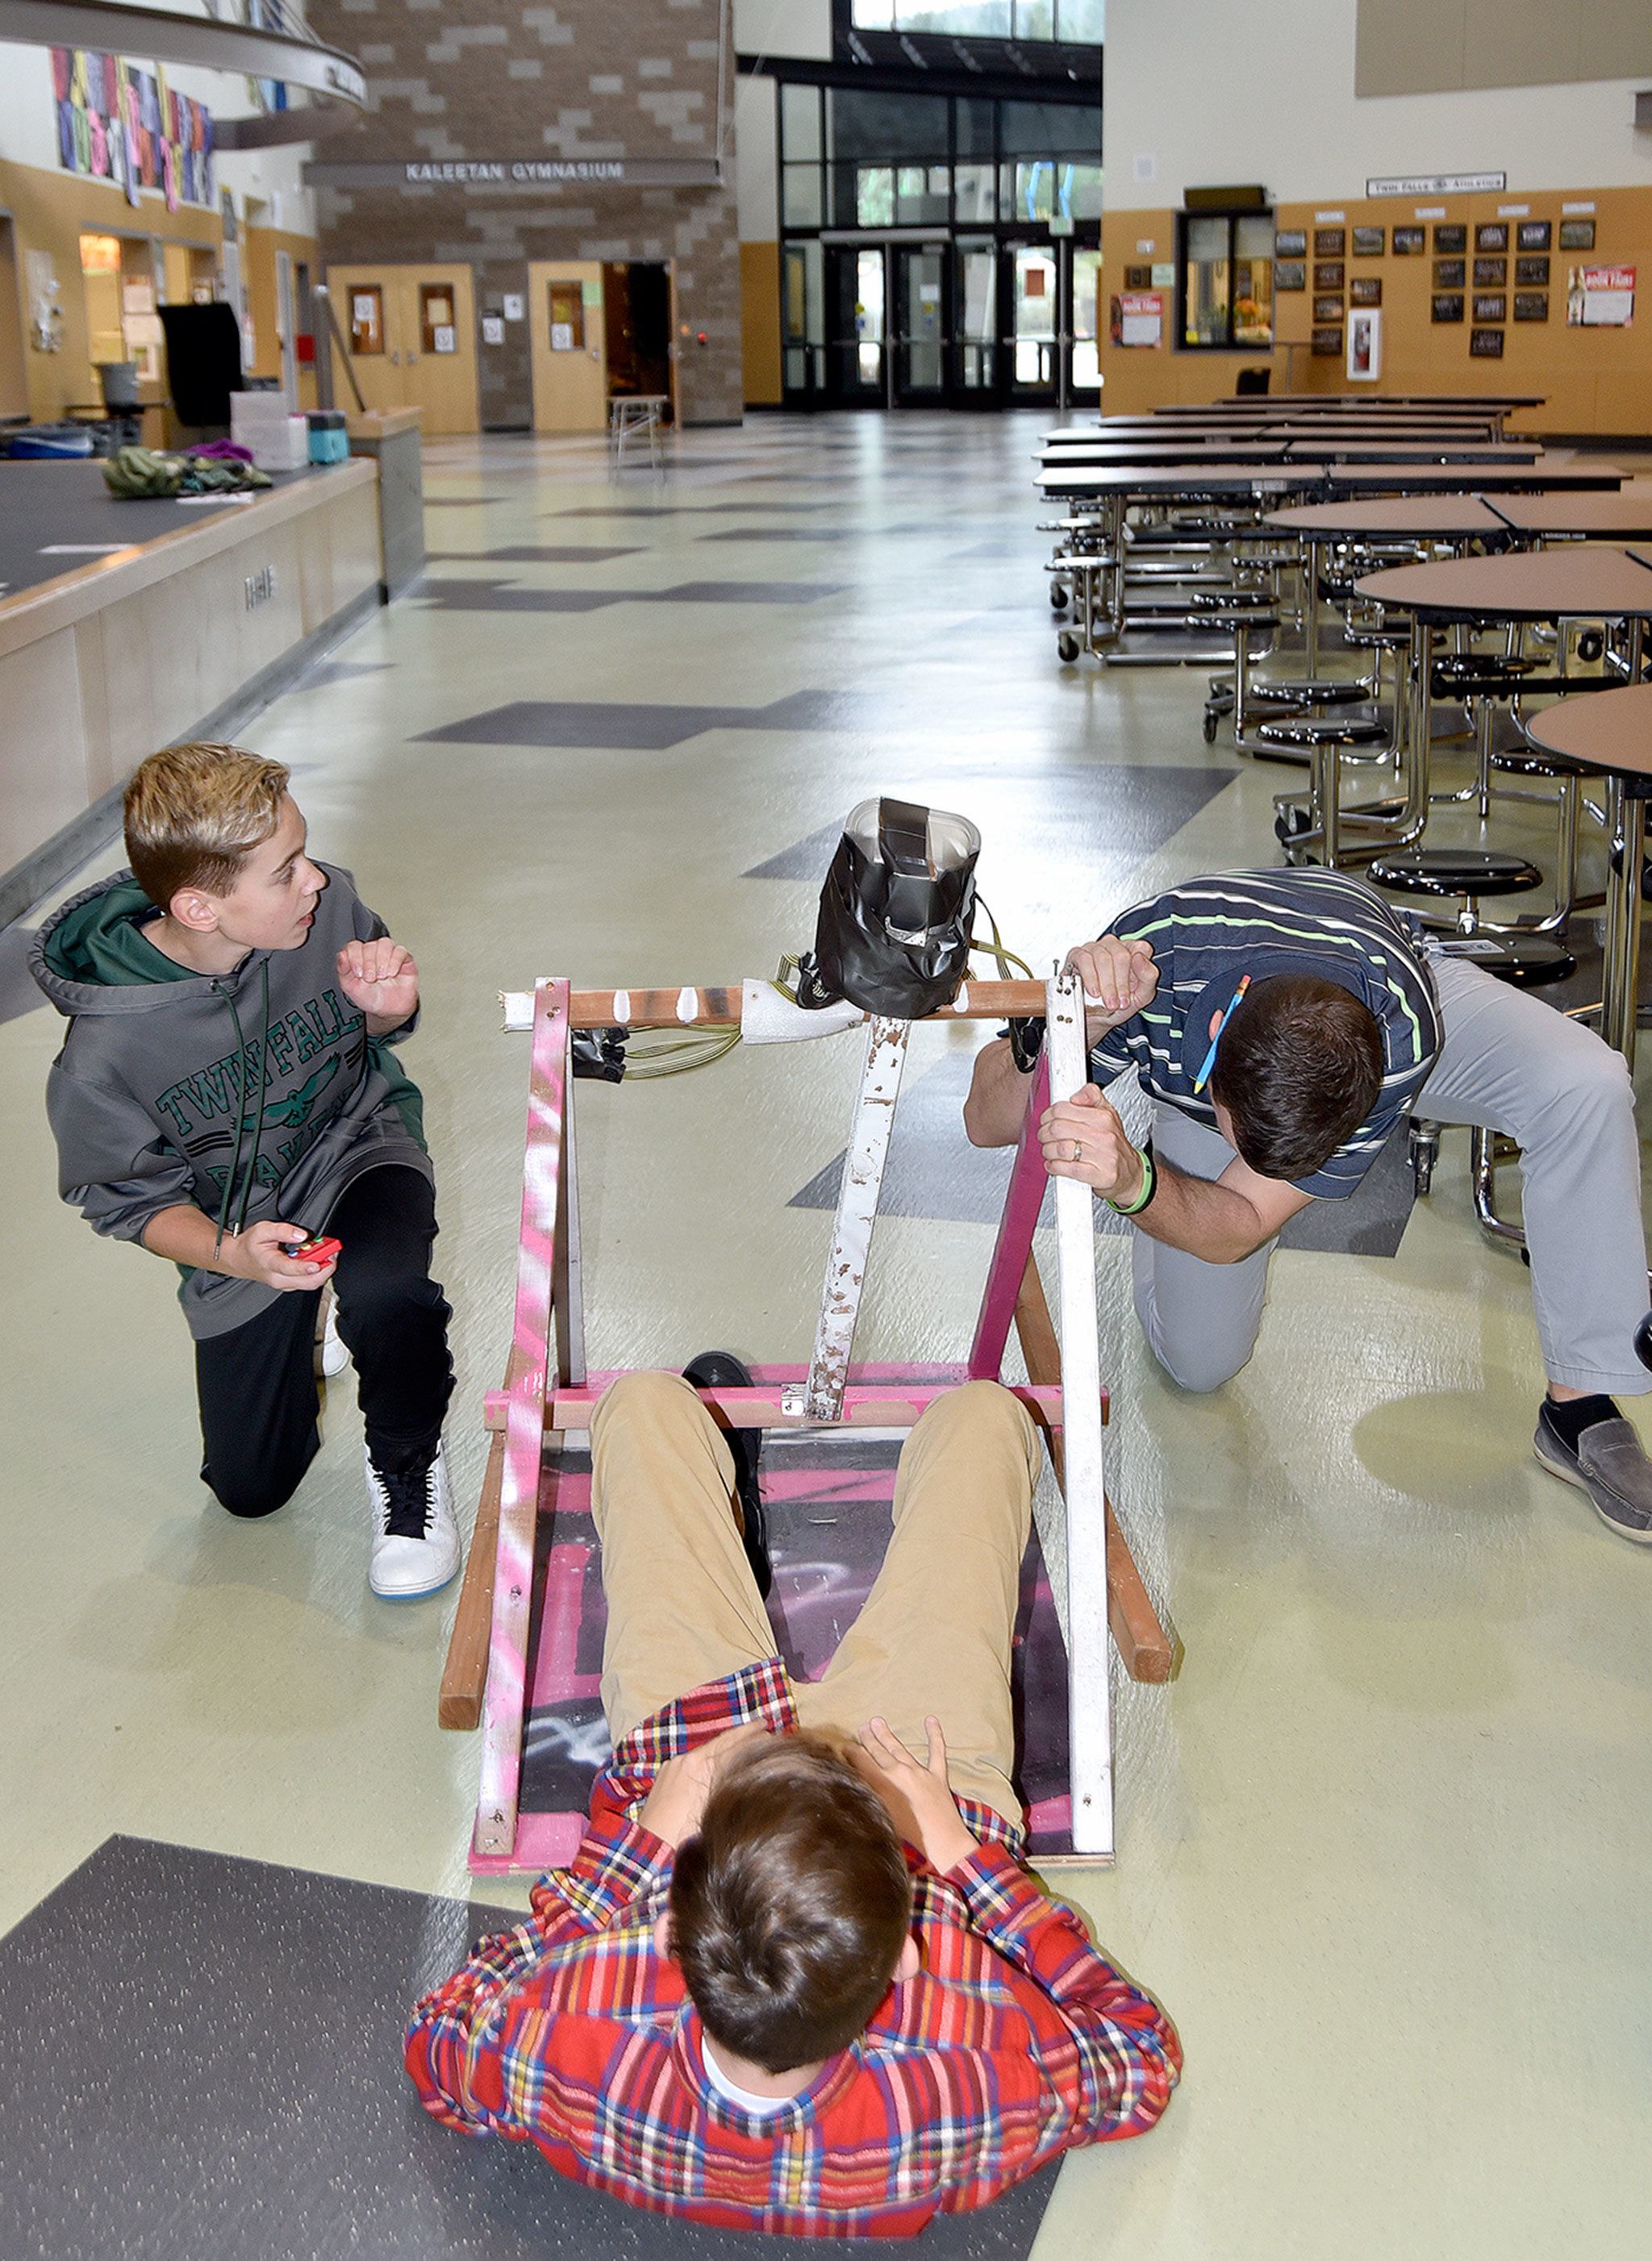 In a final test of their catapult, Carson Netu, left, and Luke Hunter, center, try launching a ball — last year’s catapult project projectile, to compare it to their results with the beanbag, while their teacher Kyle Wallace stabilizes one end of their device.                                Carol Ladwig/Staff Photo